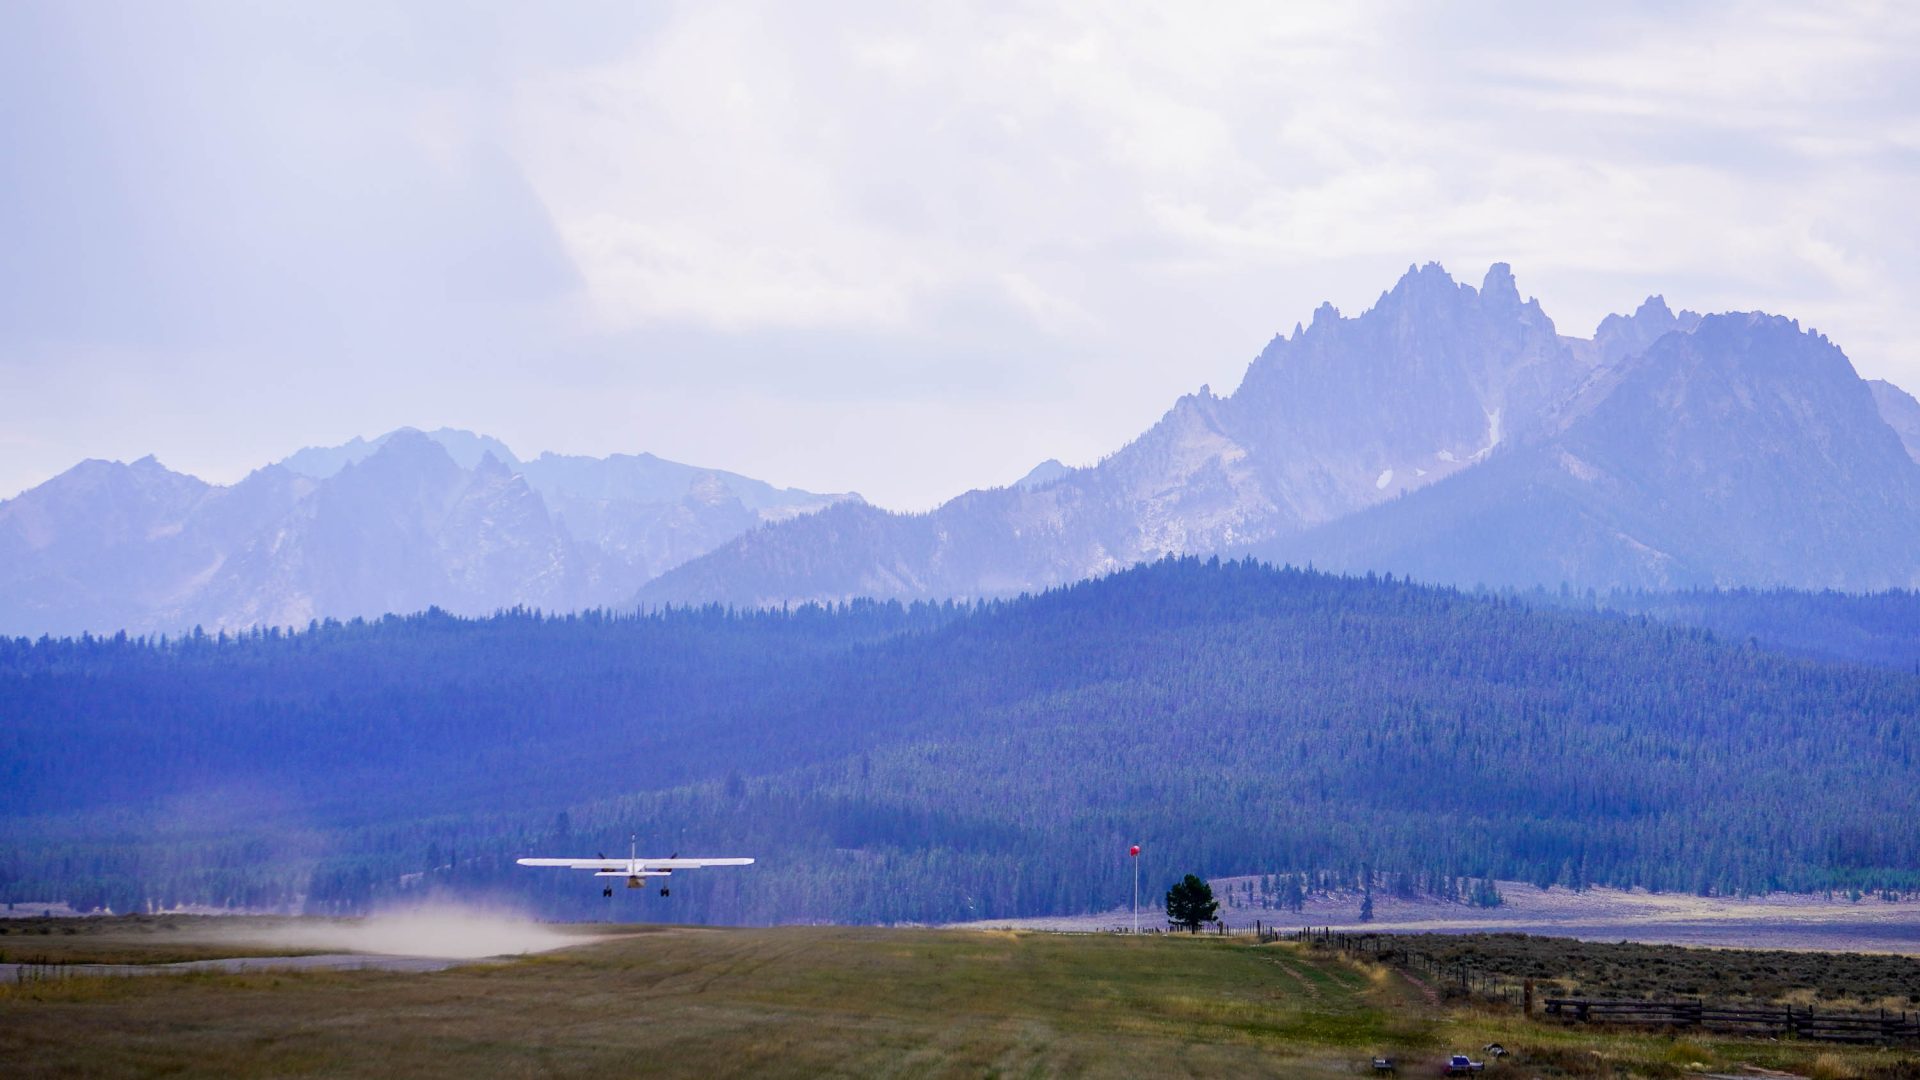 A plane takes off against a backdrop of mountains.